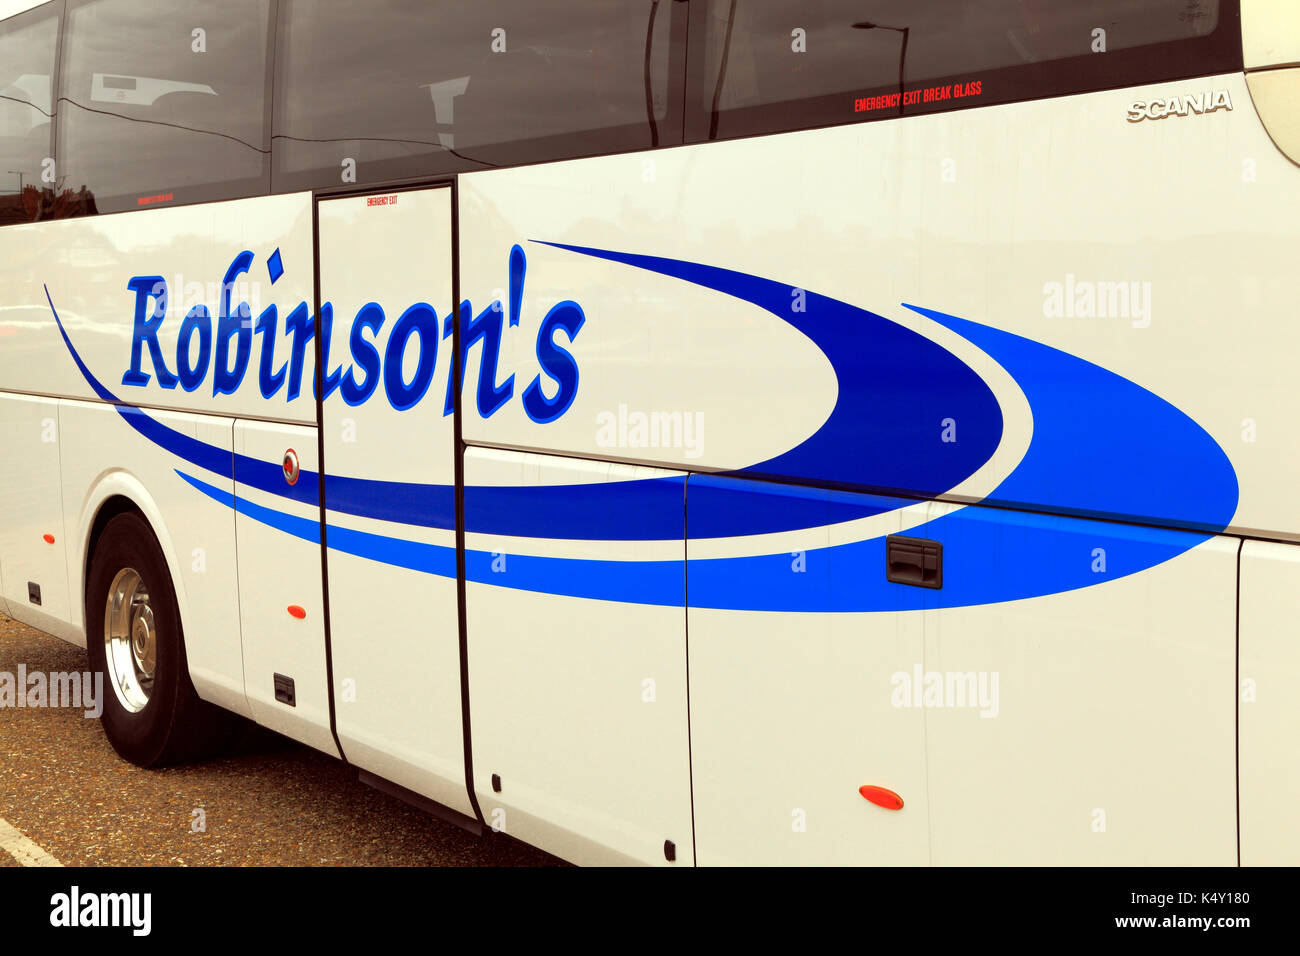 Robinson's coaches, coach, day trips, trip, excursion, excursions, travel company, companies, holiday, holidays, transport, England, UK Stock Photo